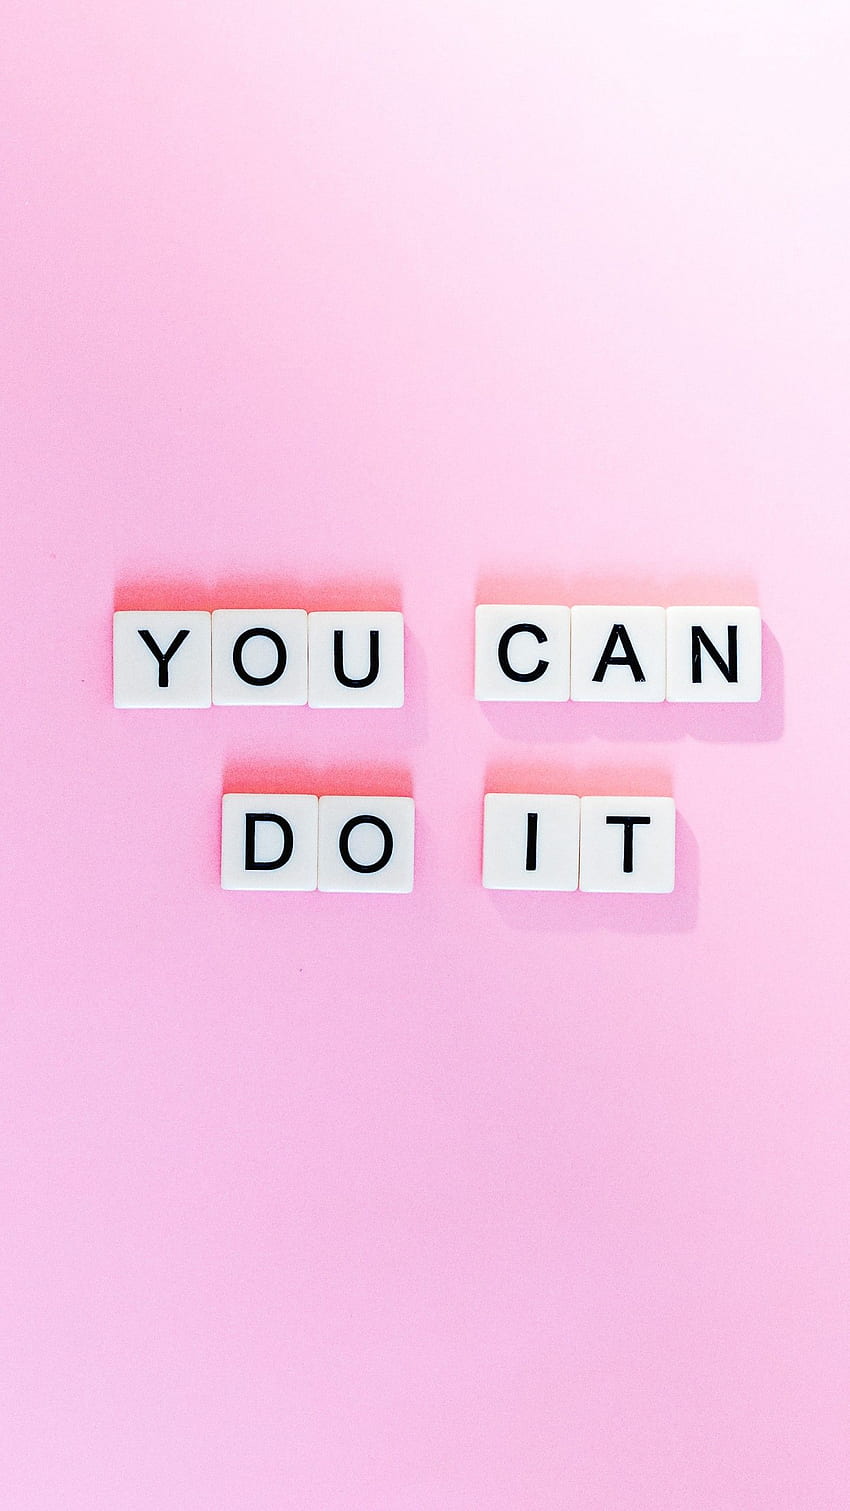 You can do it, Popular quotes, Inspirational quotes, Pink background, , Typography,. for iPhone, Android, Mobile and HD phone wallpaper